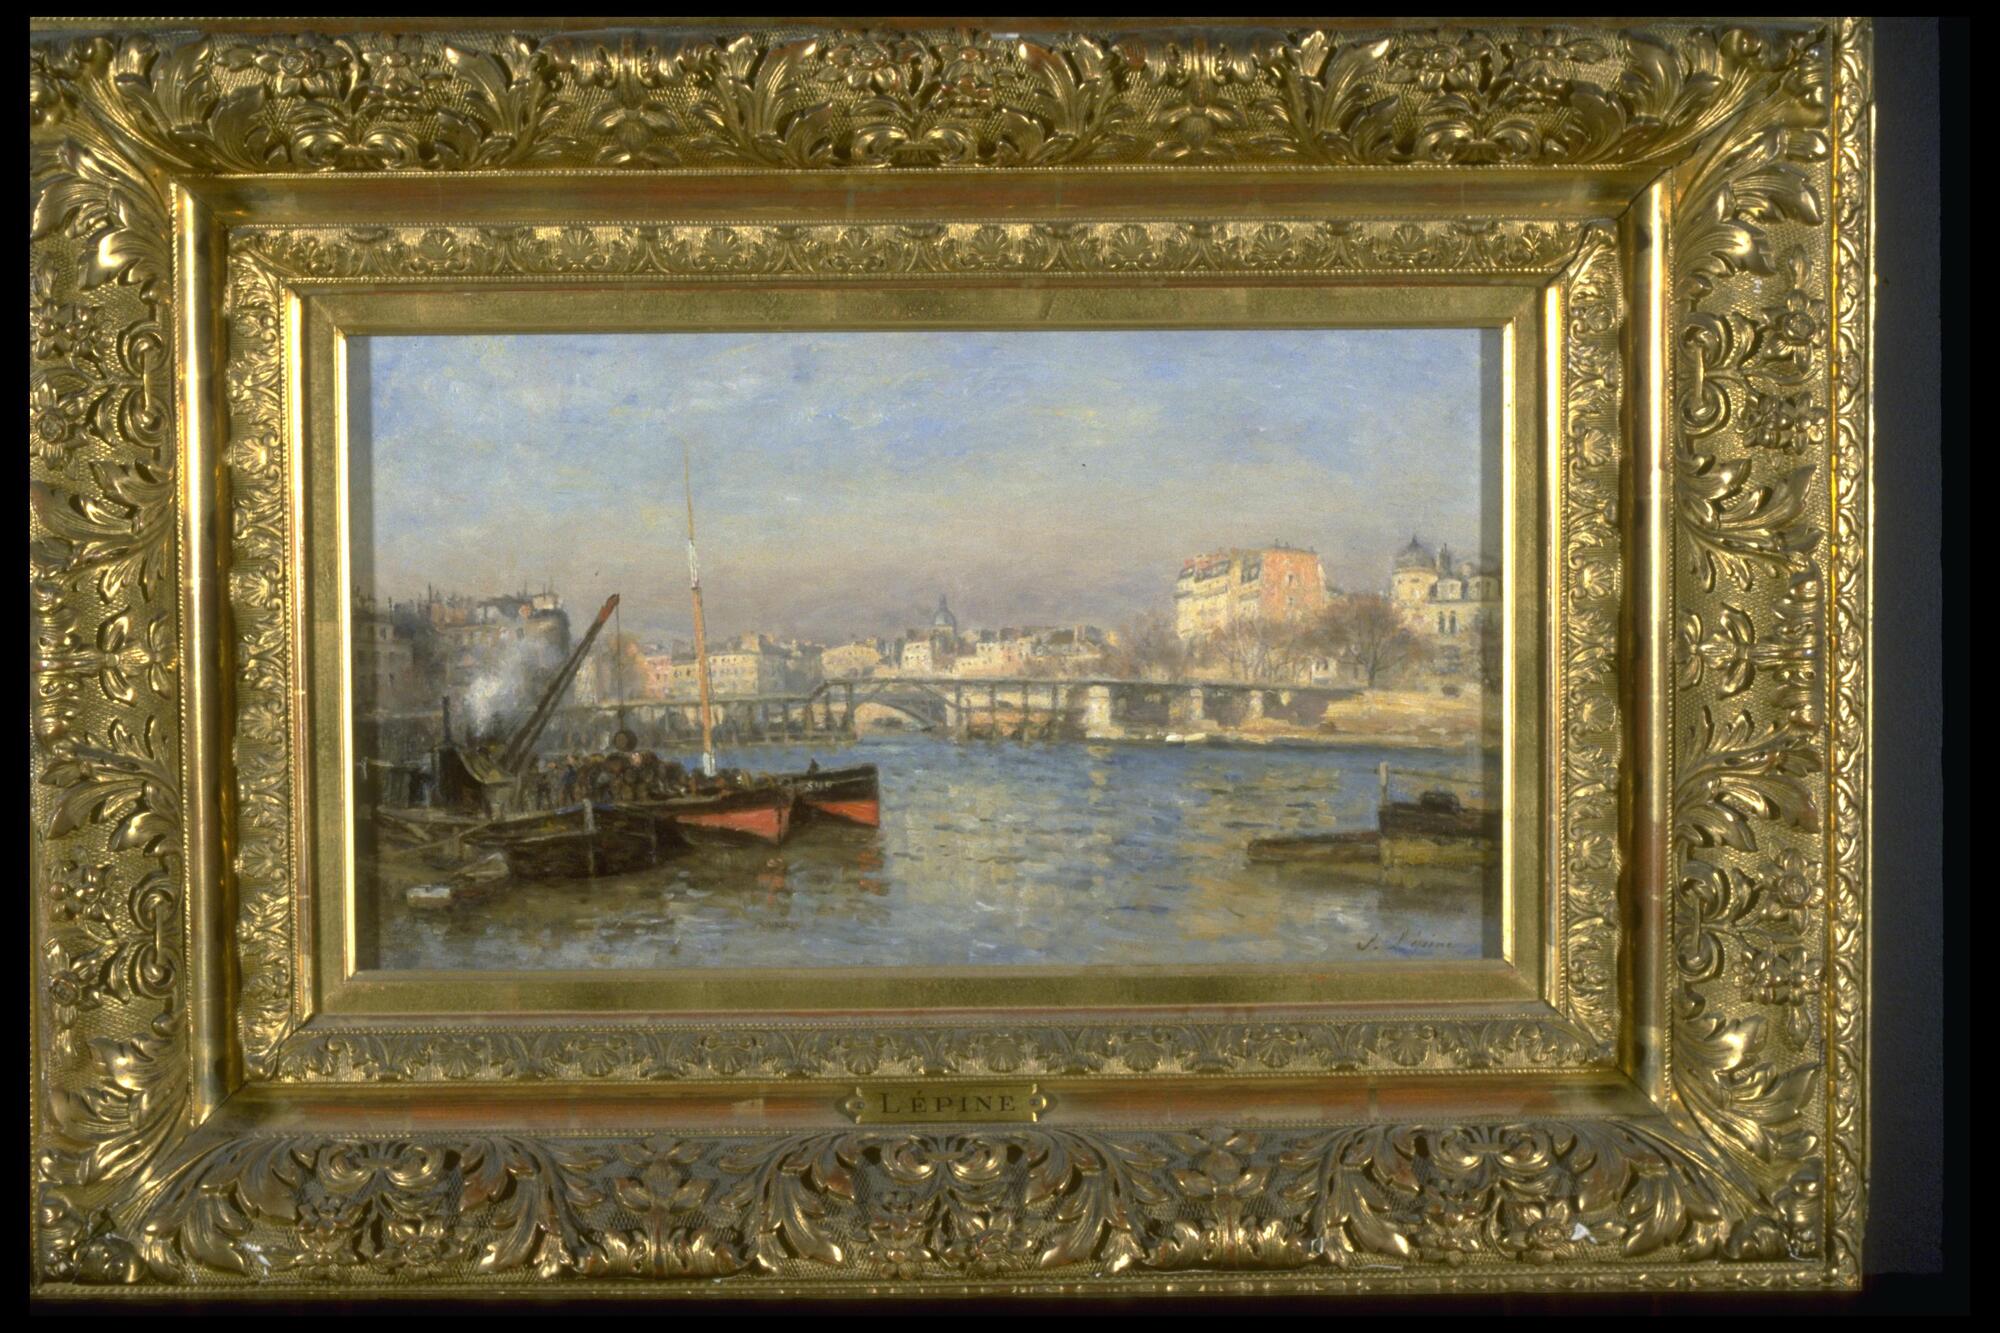 This painting shows a view of the Seine river in Paris, including the wooden bridge, the Pont de l'Estacade.  The foreground is filled is small boats and a dock winch, while the in the distance the bridge and buildings of Paris glow in late afternoon light.